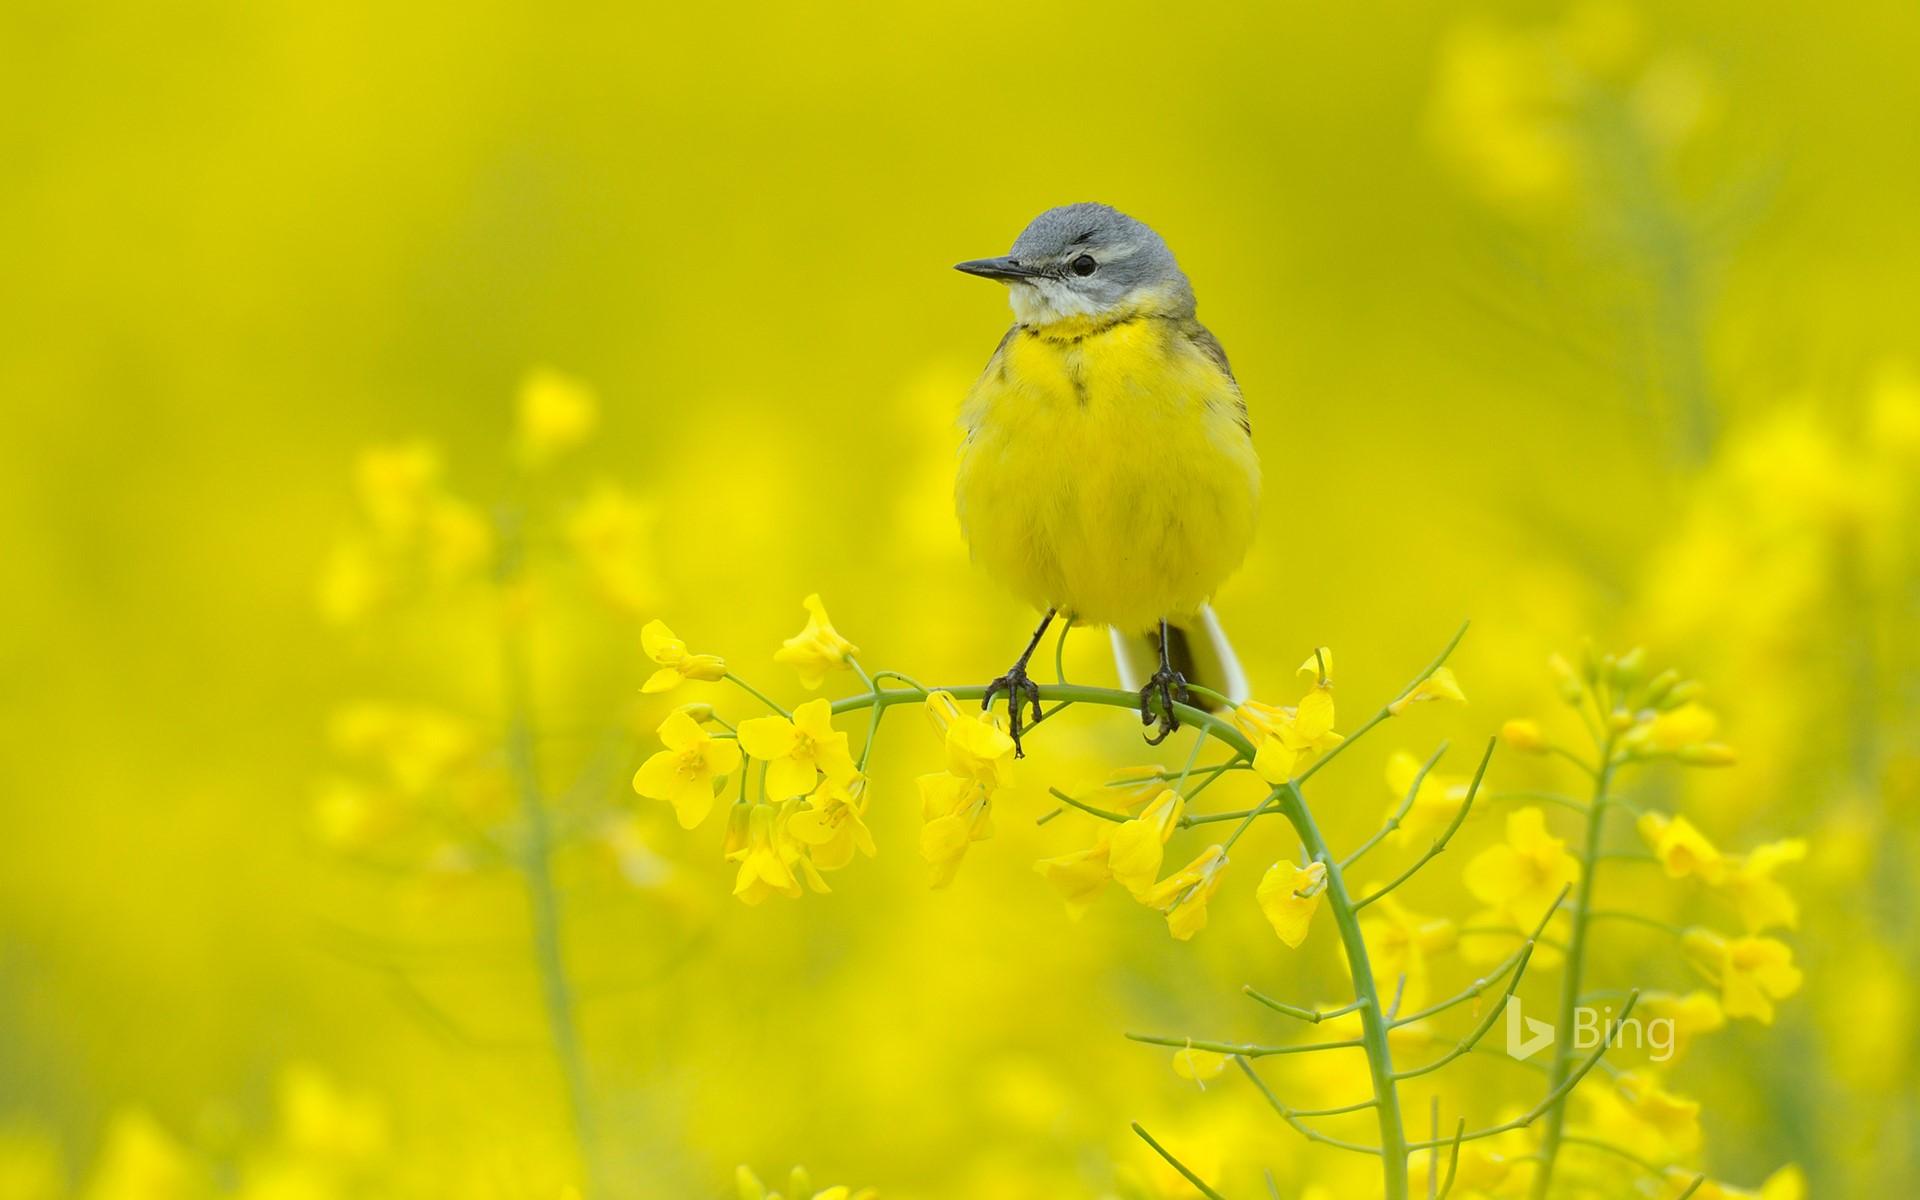 Blue-headed wagtail amid yellow flowers, Hesse, Germany